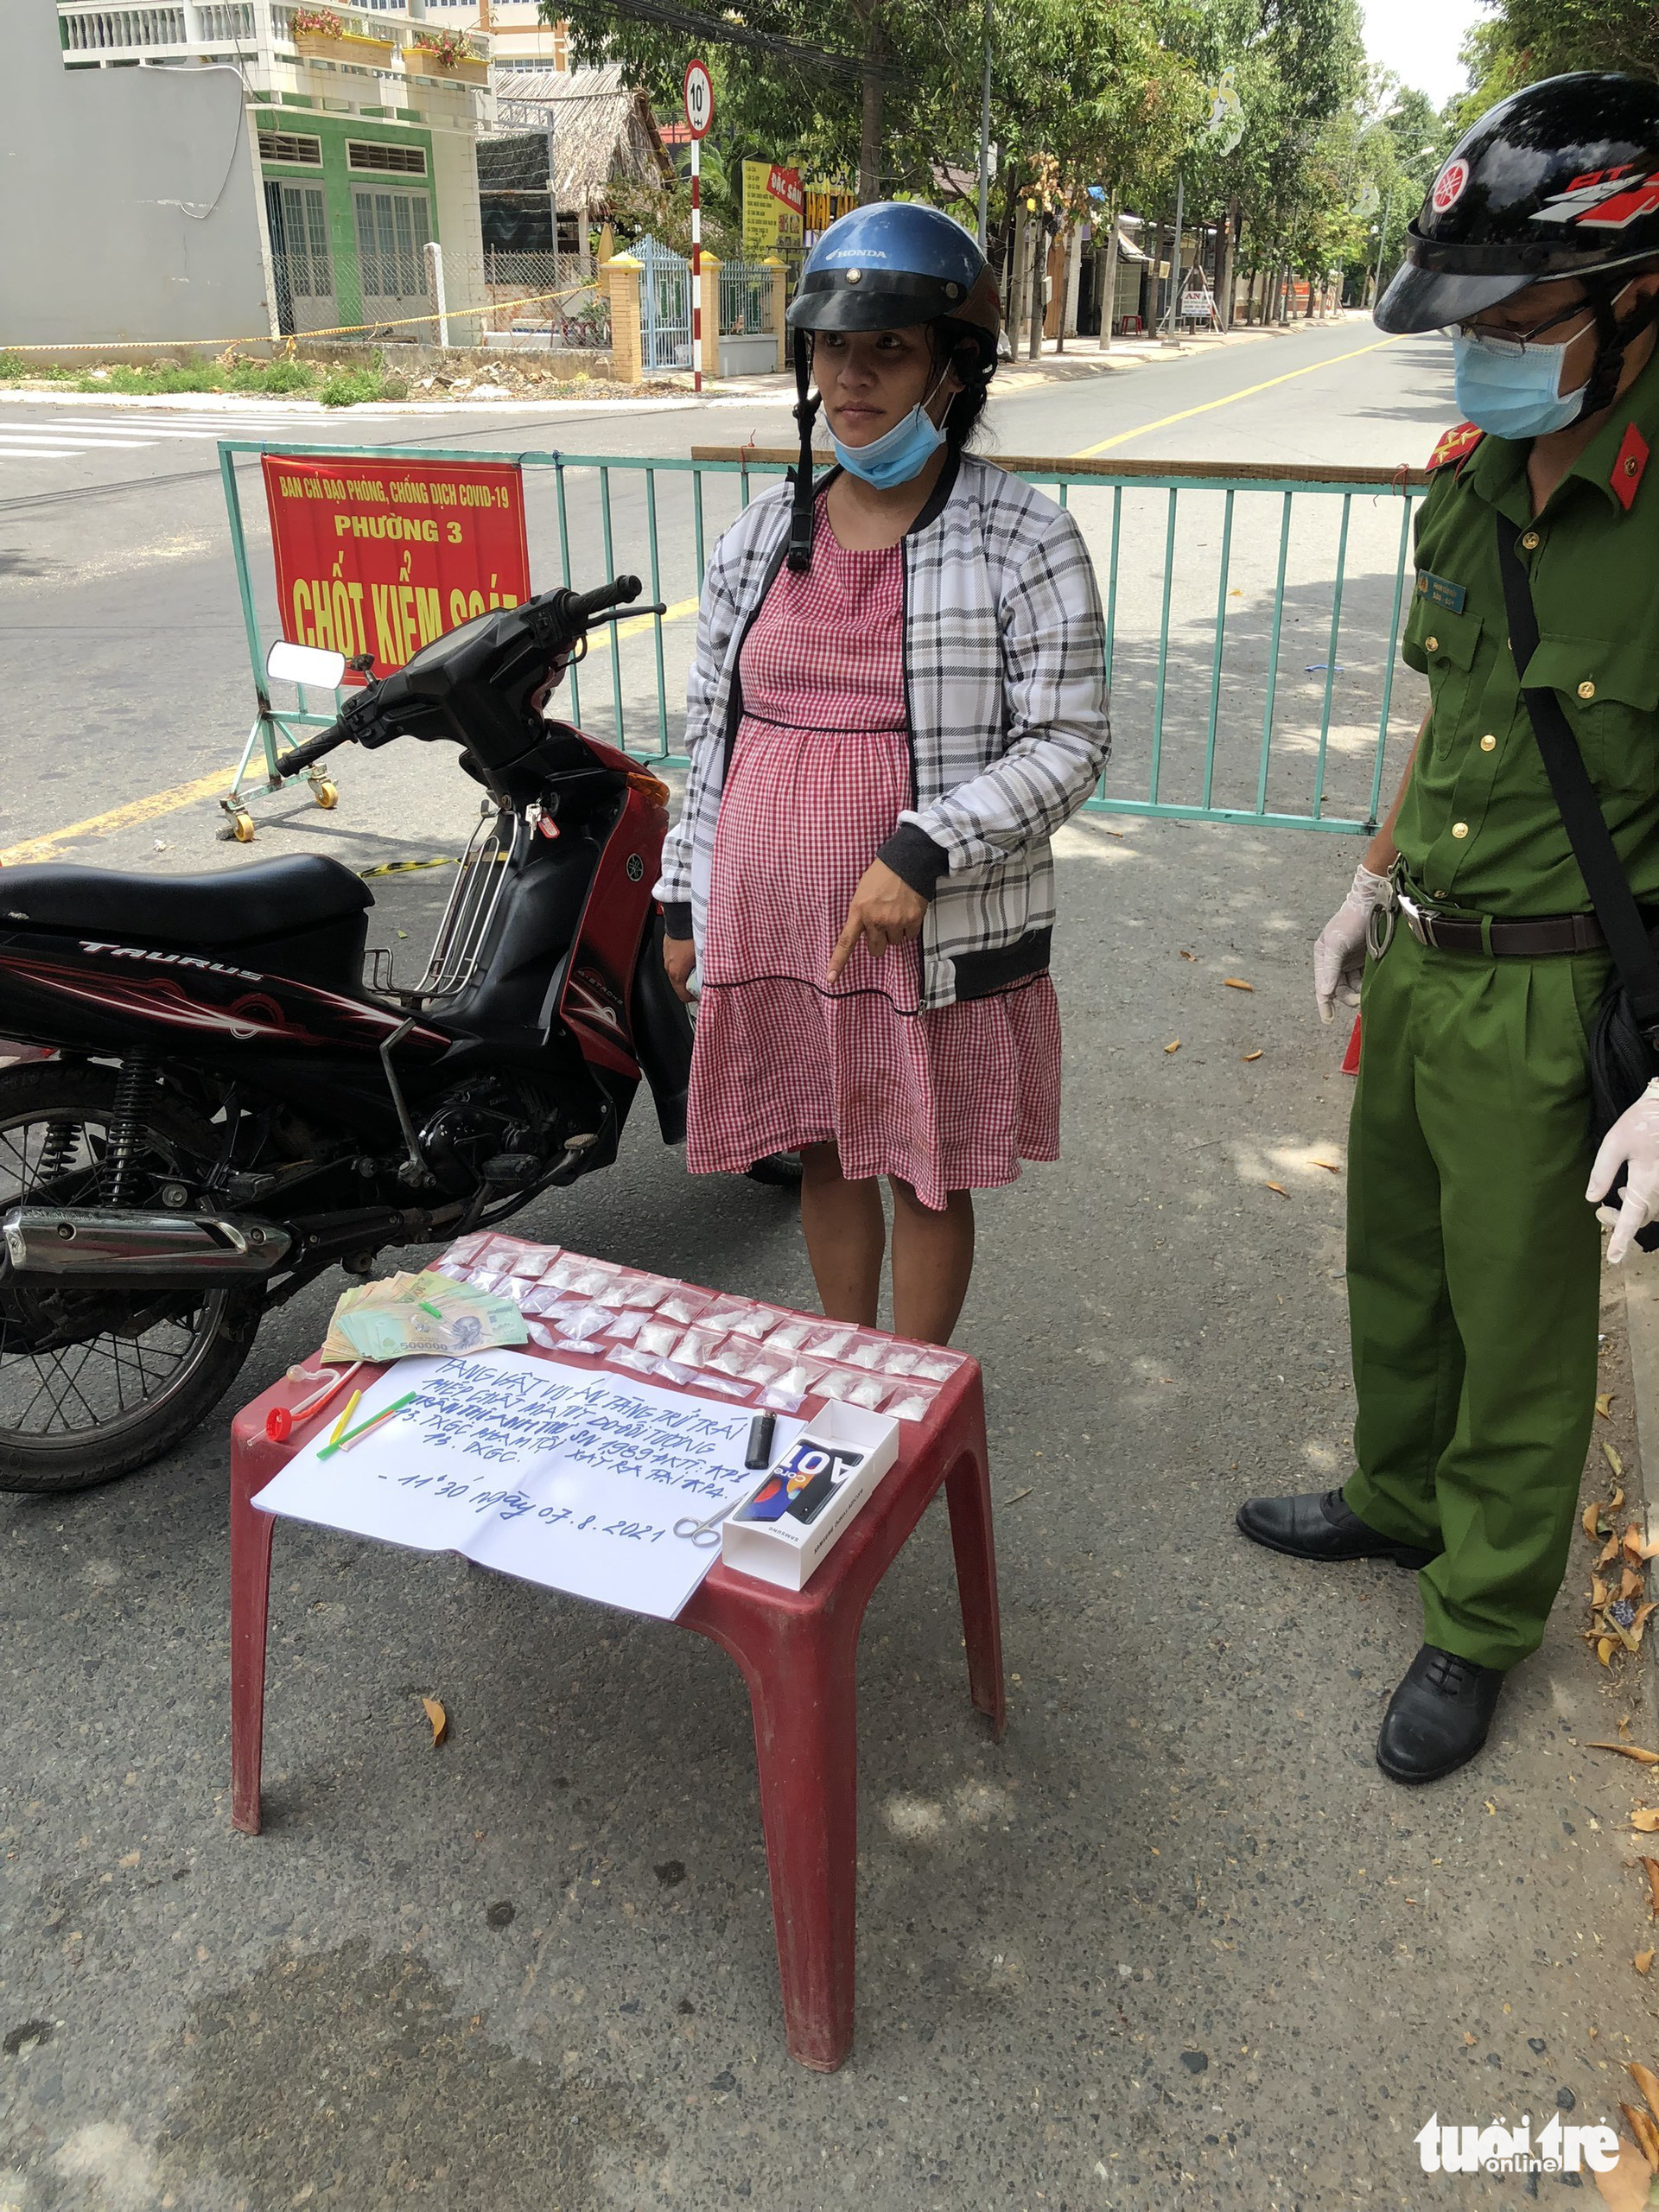 Pregnant woman caught transporting suspected drugs in Vietnam’s Mekong Delta